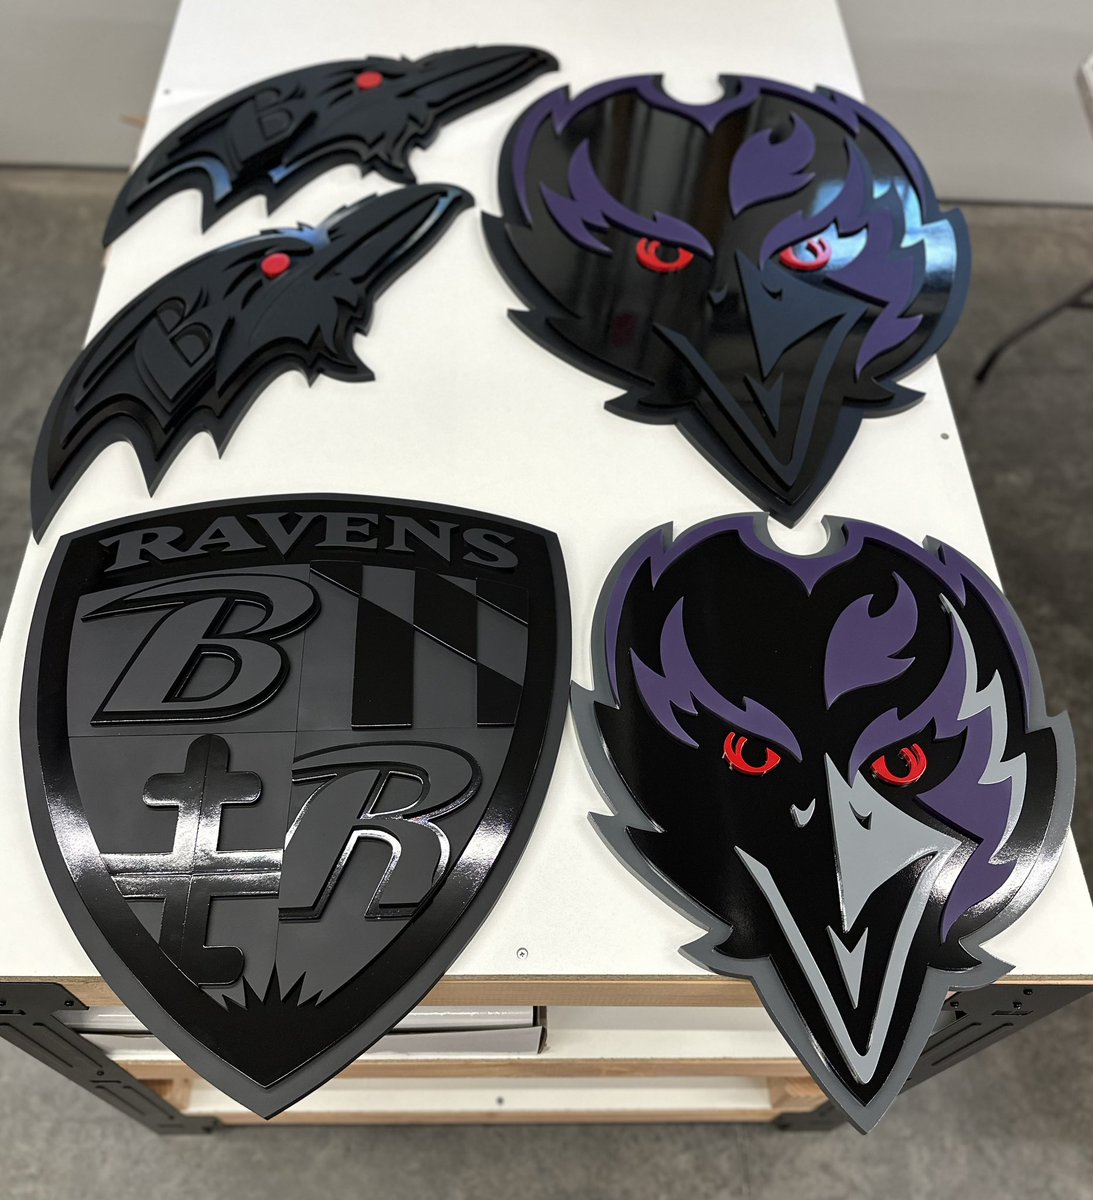 Was a busy week. 5 of the many signs done this week. 

#RavensFlock #ravens #MD #Baltimore #scrollsaw